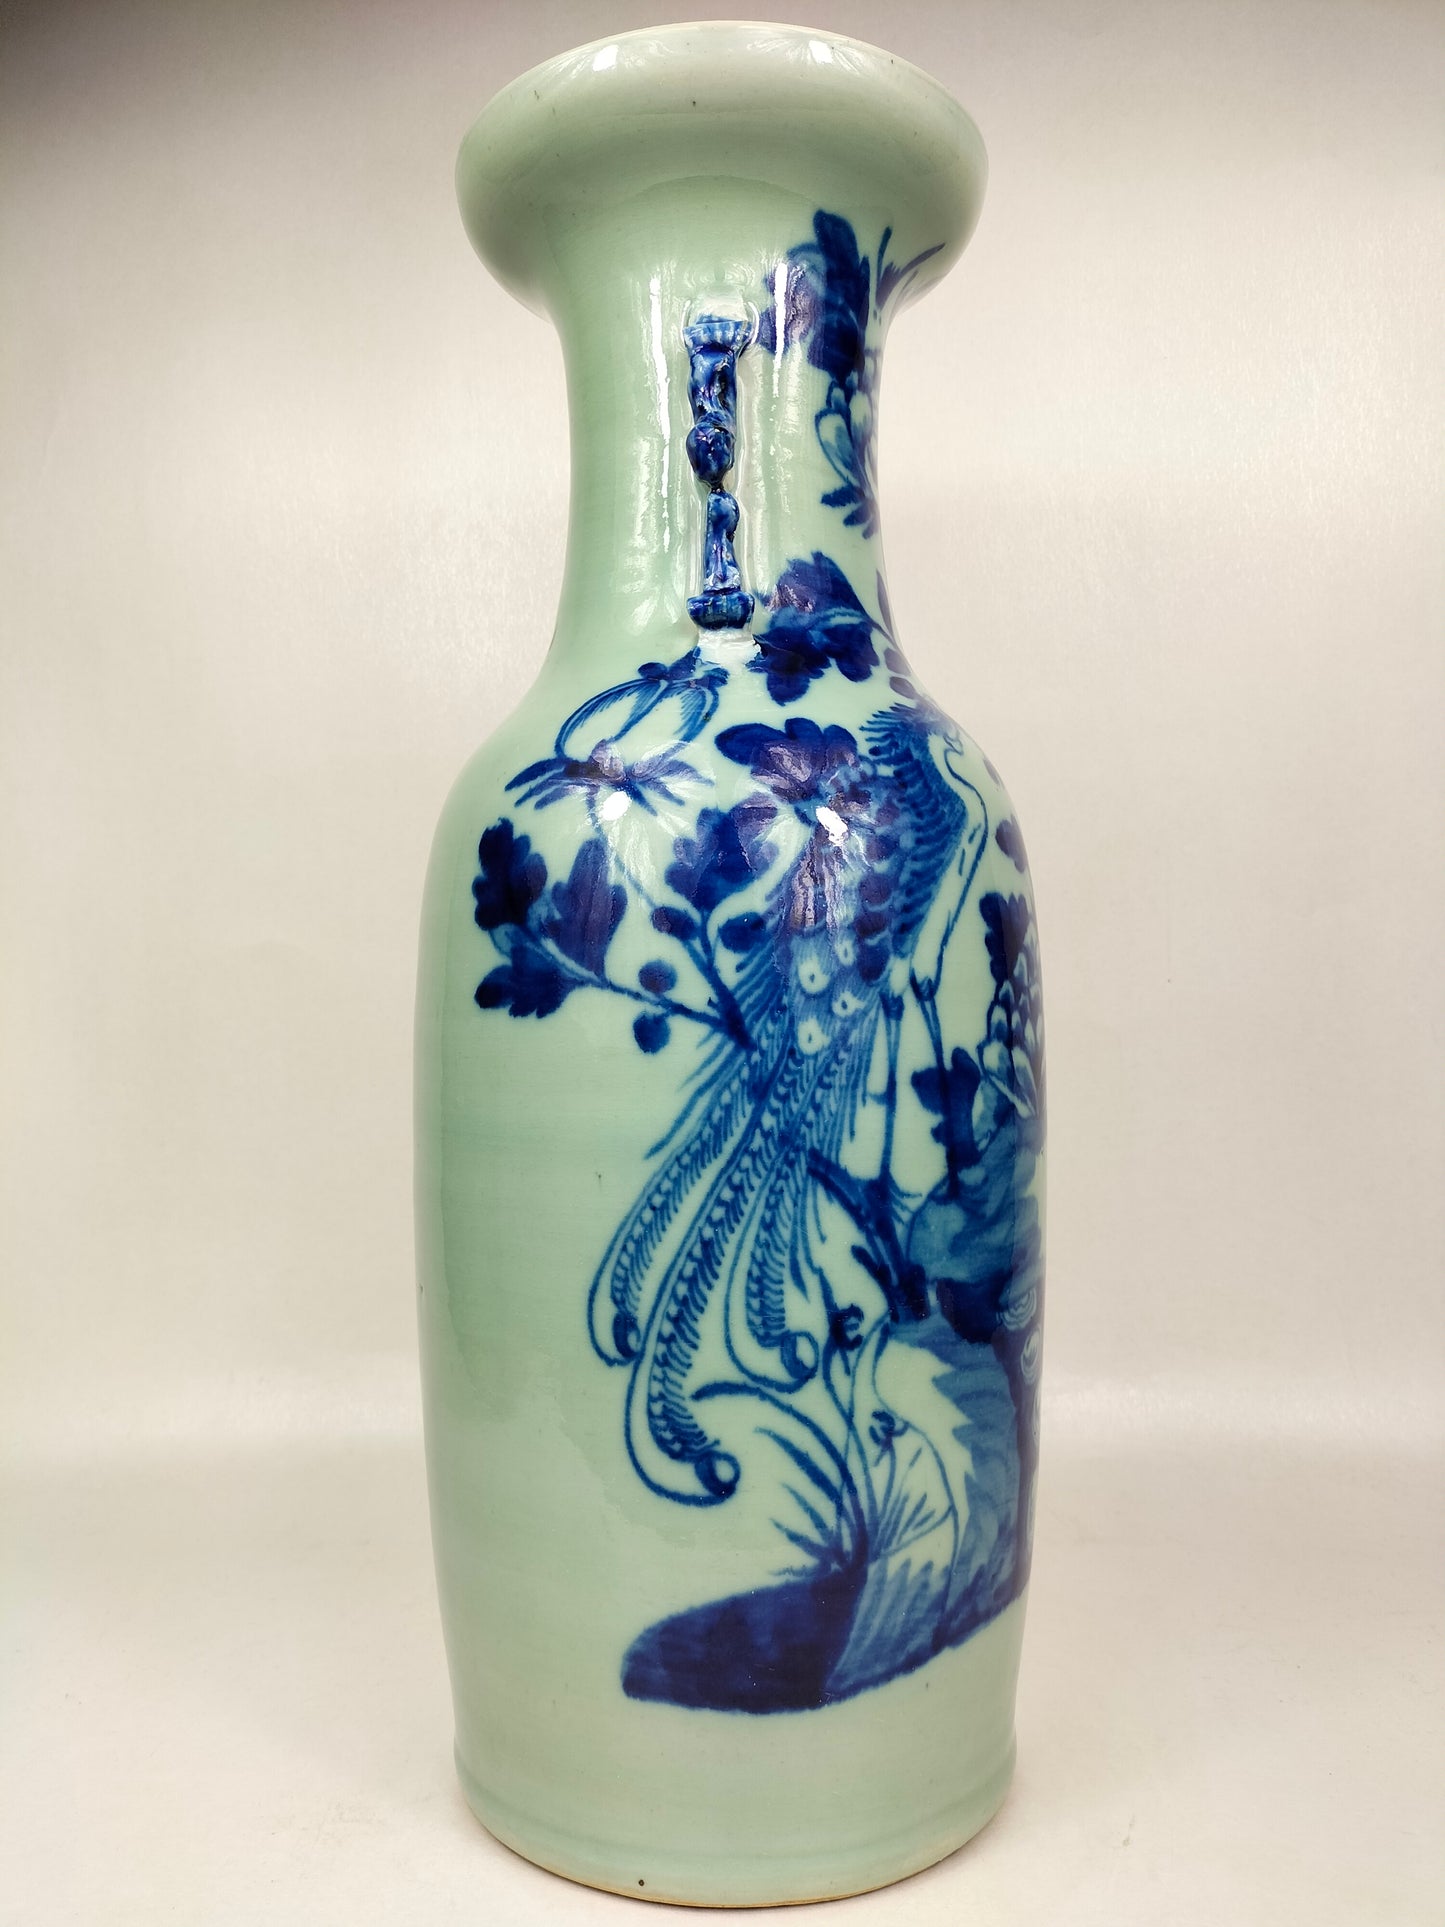 Large antique Chinese celadon colored vase decorated with birds and flowers // Qing Dynasty - 19th century